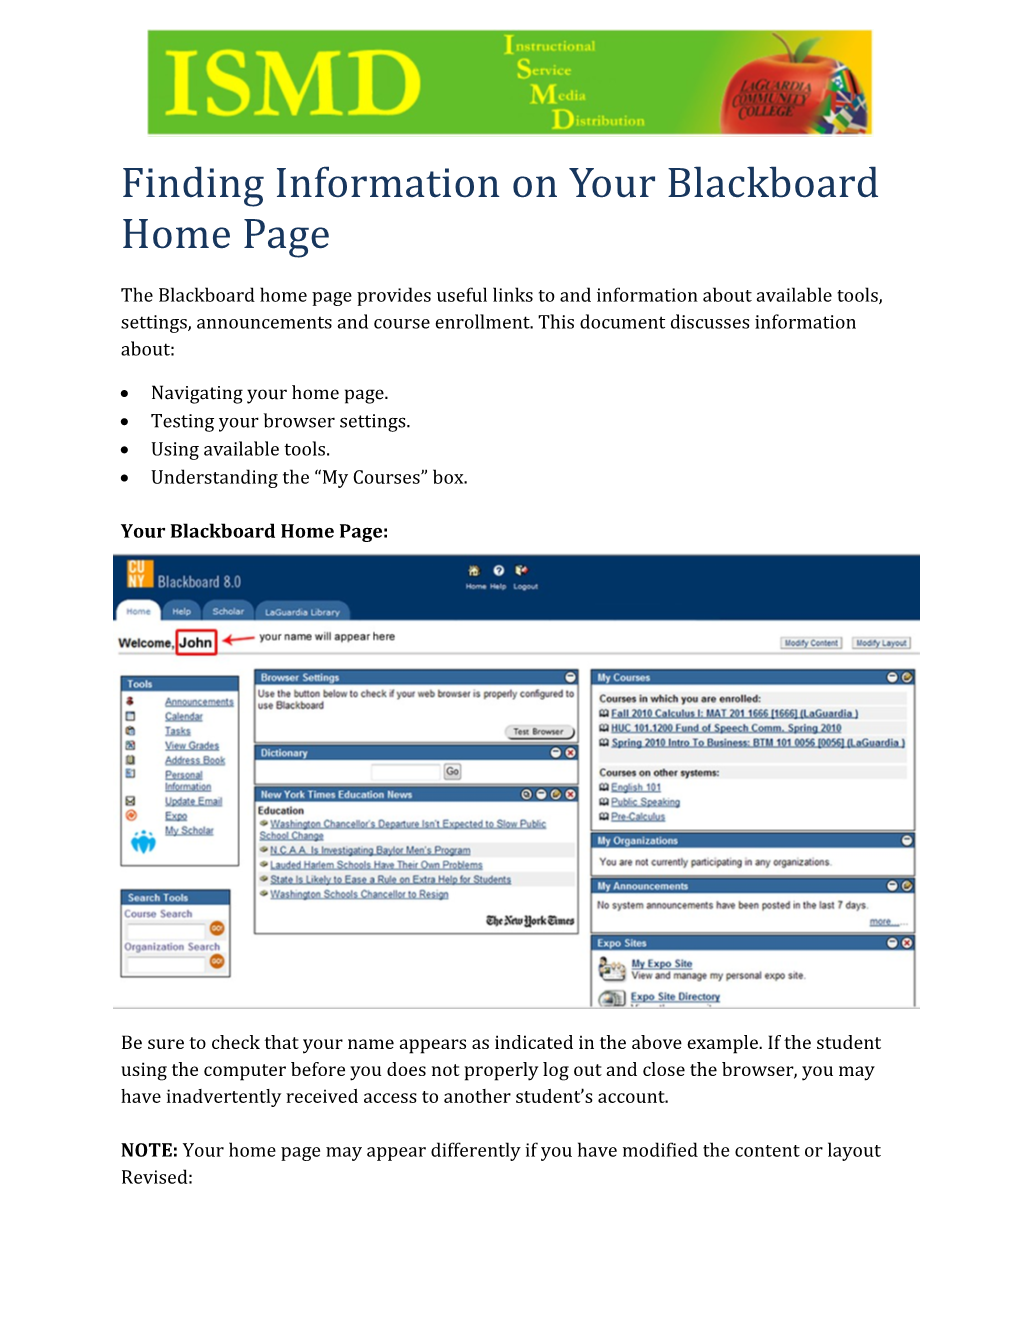 Finding Information on Your Blackboard Home Page